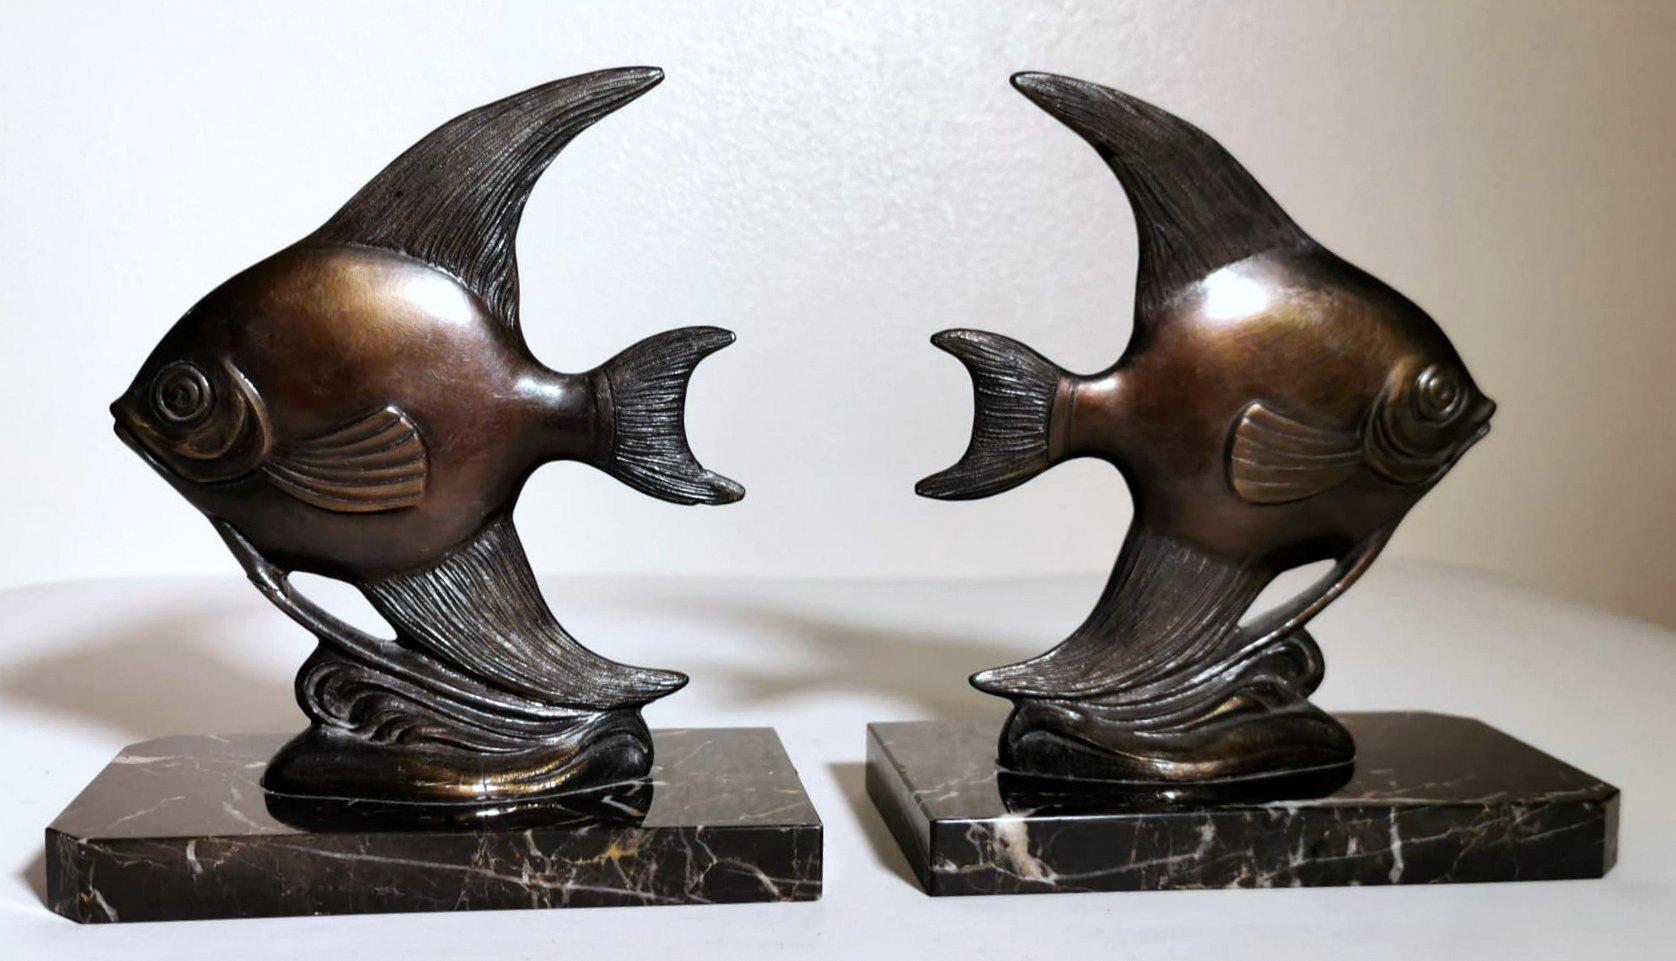 Art Deco Pair of French Spelter Bookends in Fish Shape and Marquinia Marble Base For Sale 1